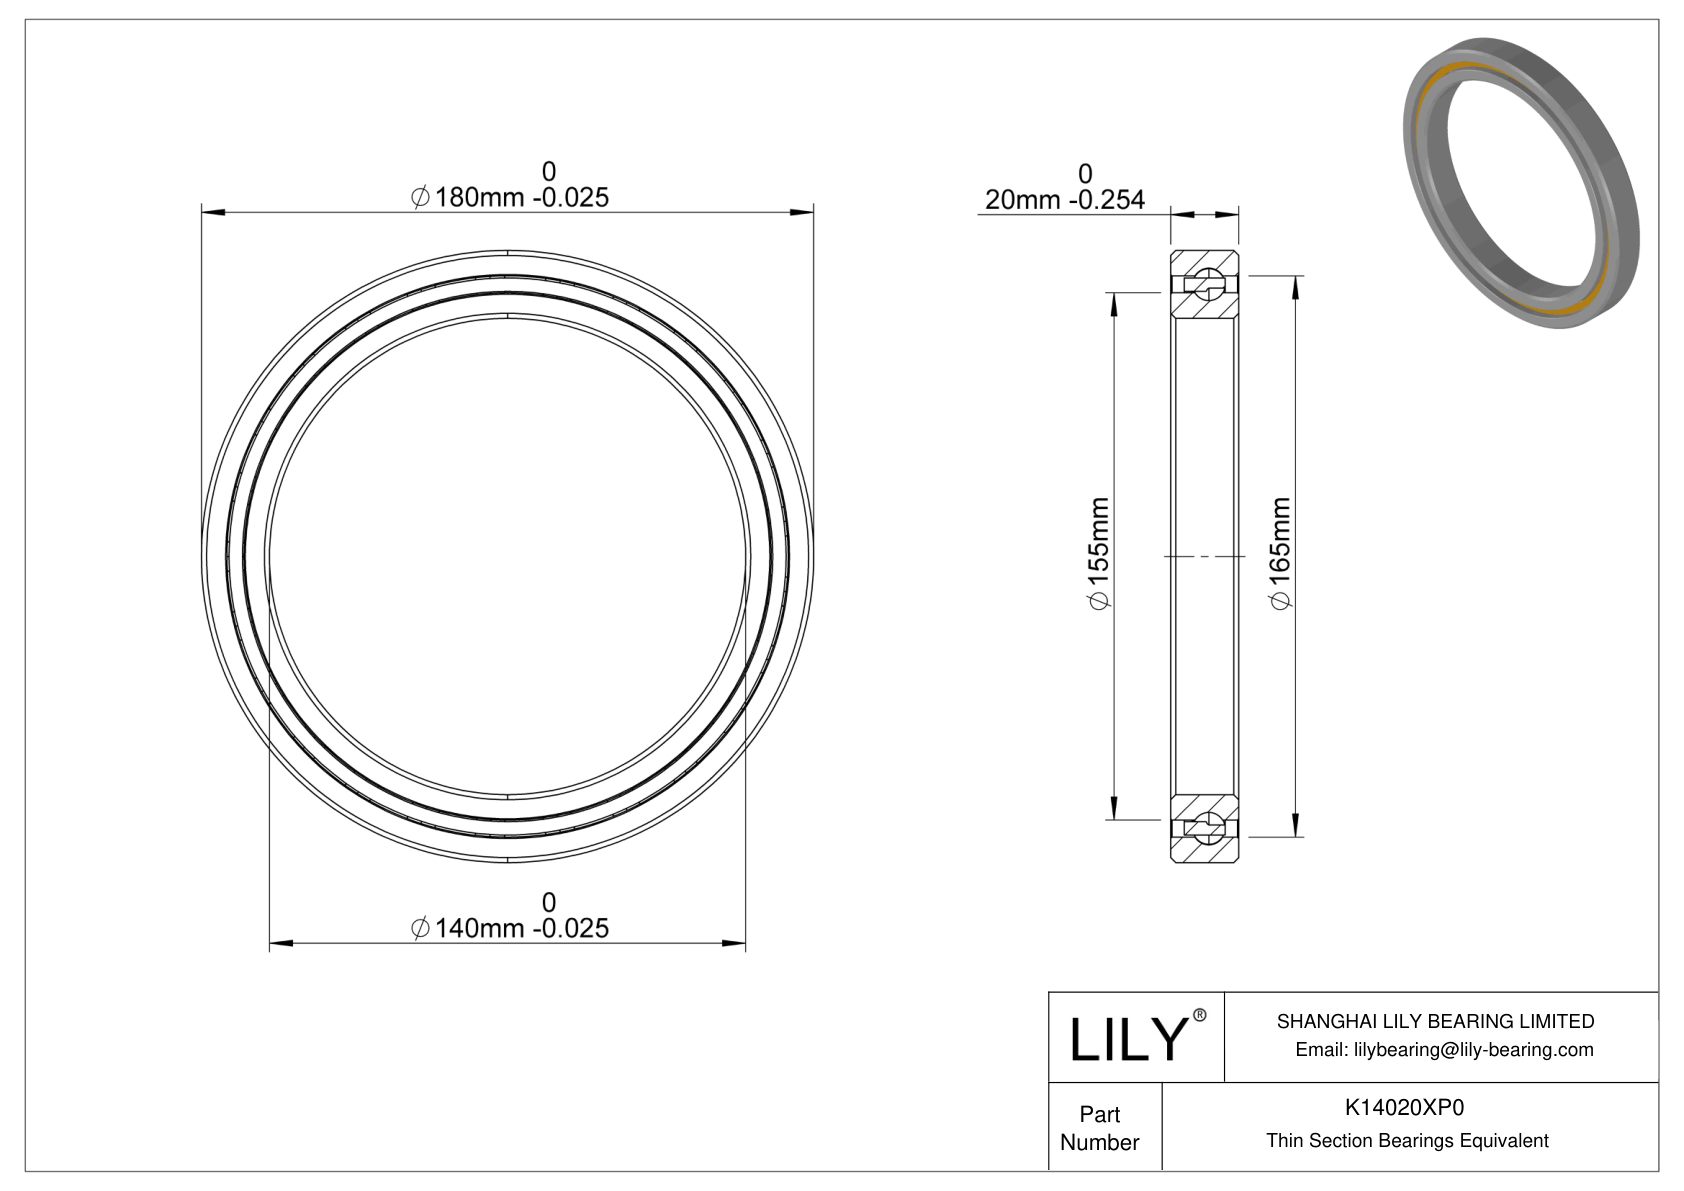 K14020XP0 Constant Section (CS) Bearings cad drawing